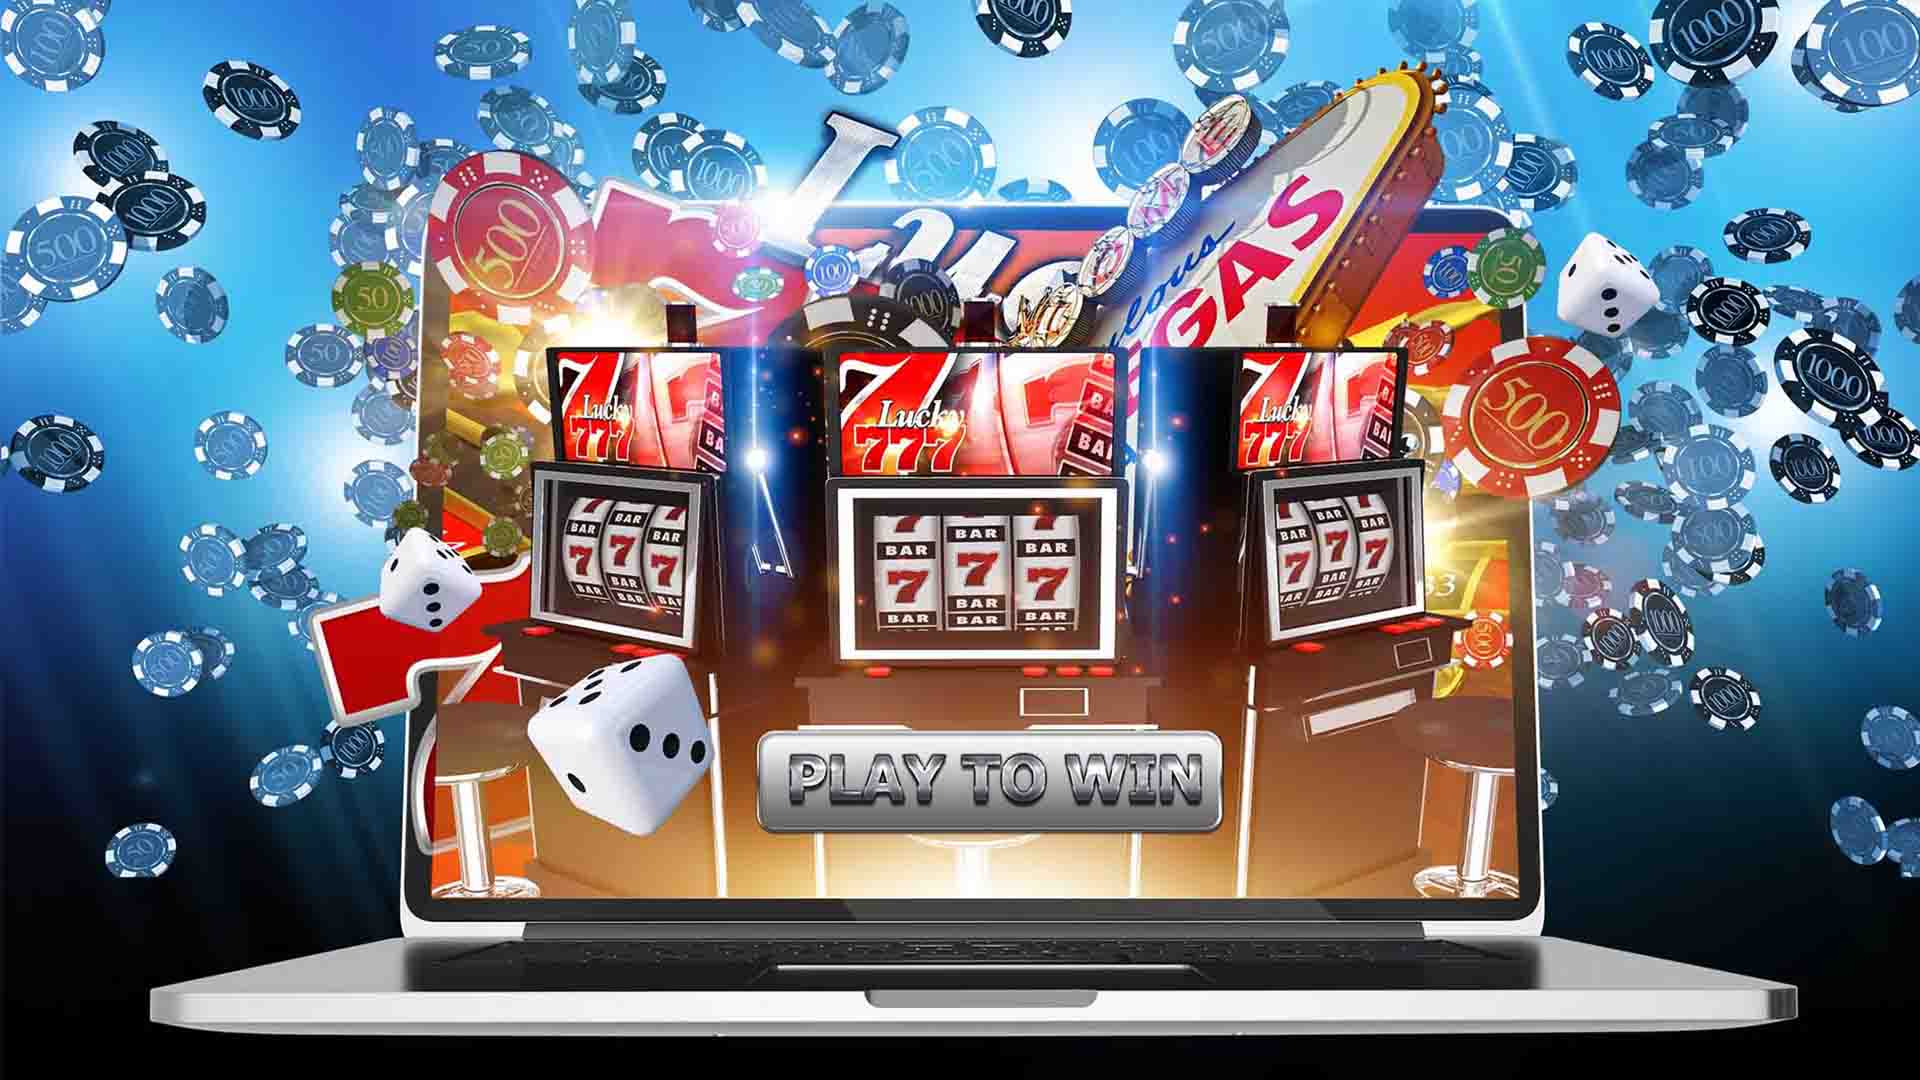 What benefits of playing baccarat online?